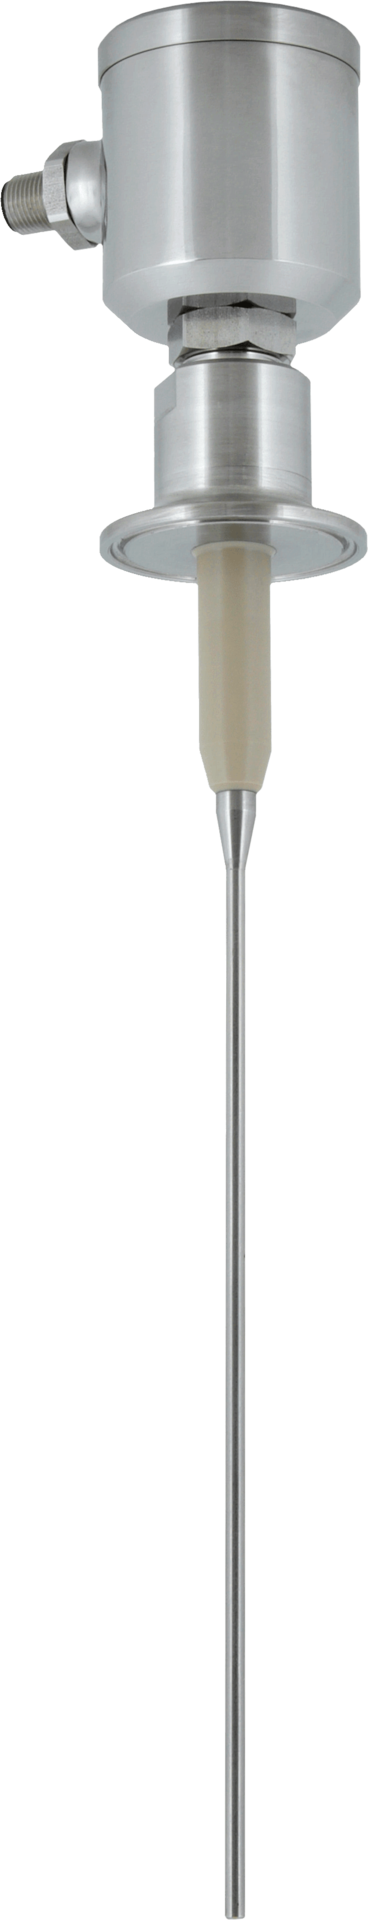 NCS-L-31P Point level sensor with long probe and direct connection - Point Level Sensors - Img 1 - Anderson-Negele